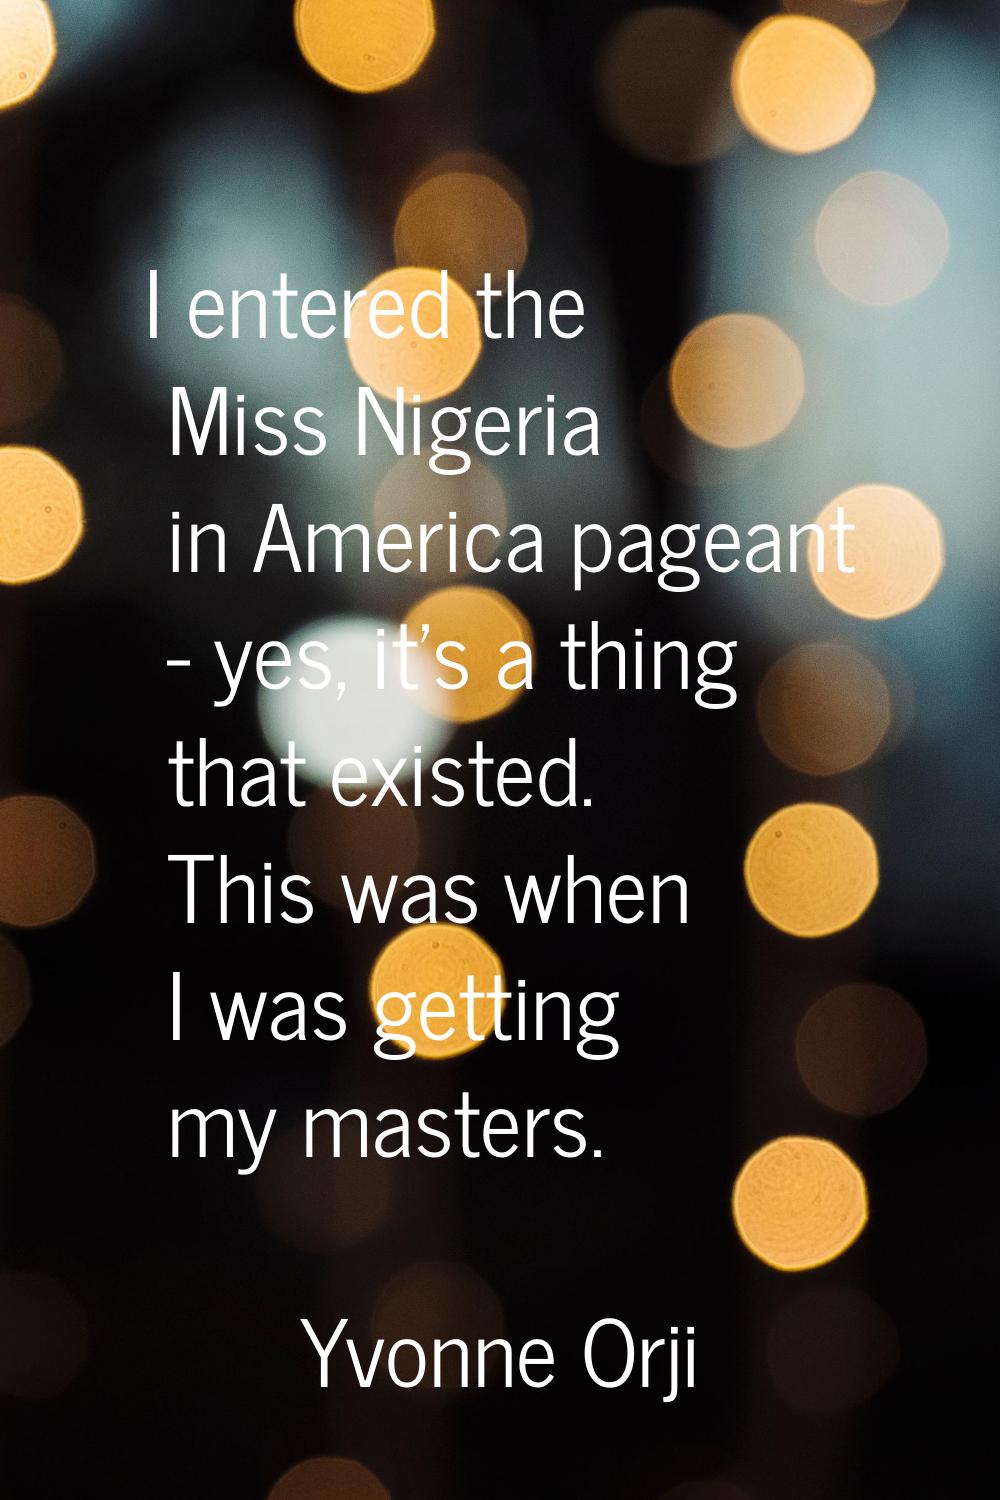 I entered the Miss Nigeria in America pageant - yes, it's a thing that existed. This was when I was